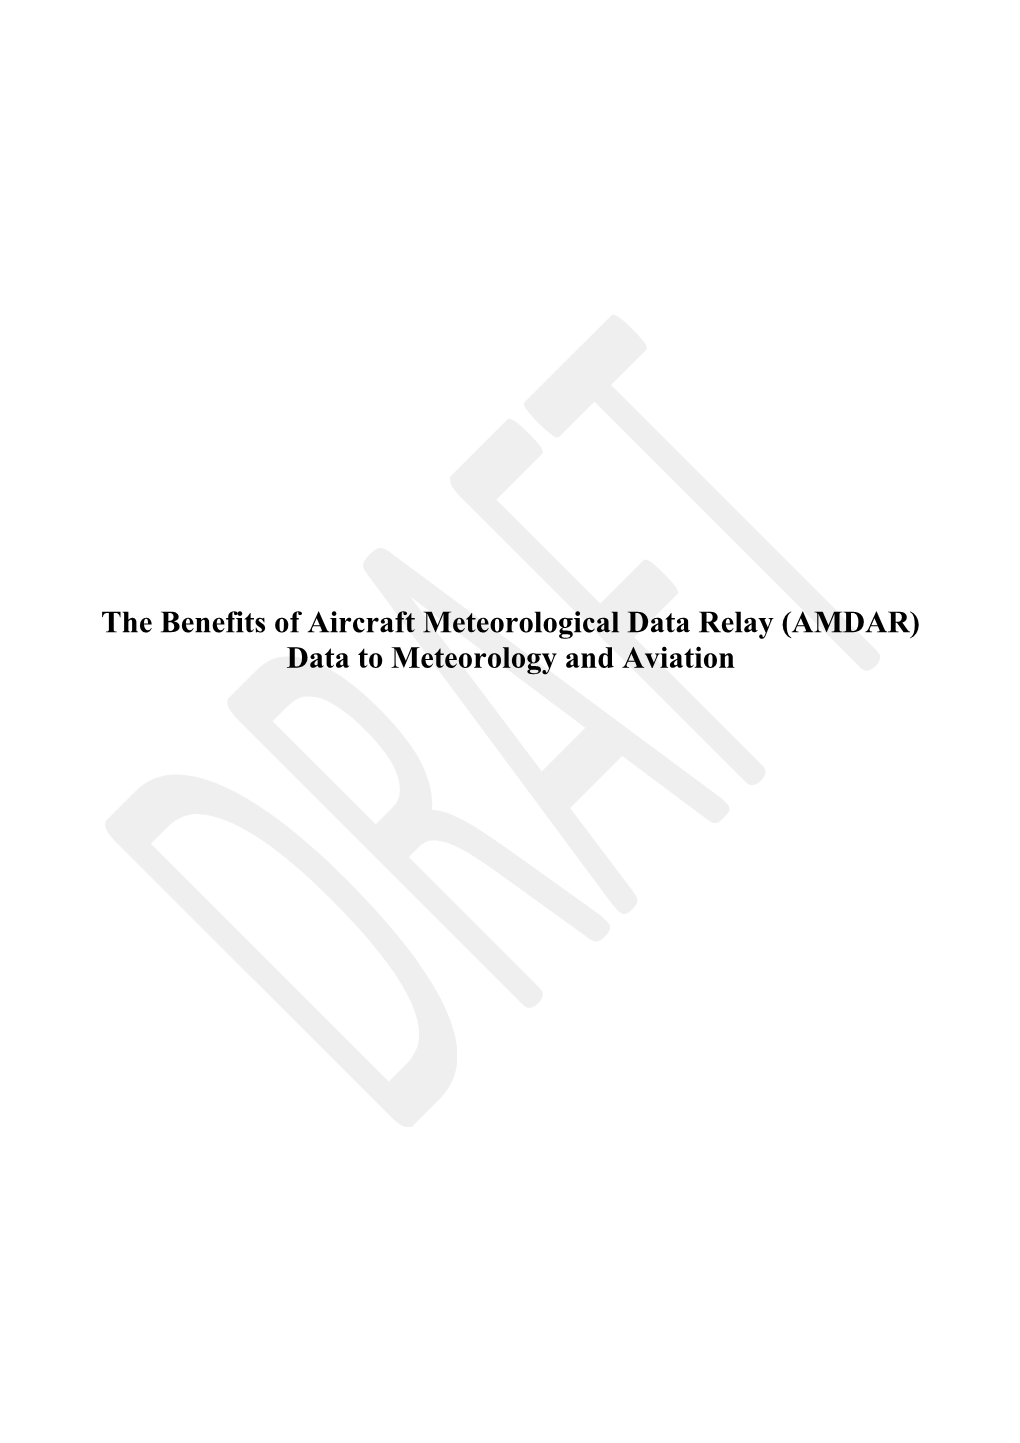 Benefit of AMDAR Data to Meteorology and Aviation Version 1D1